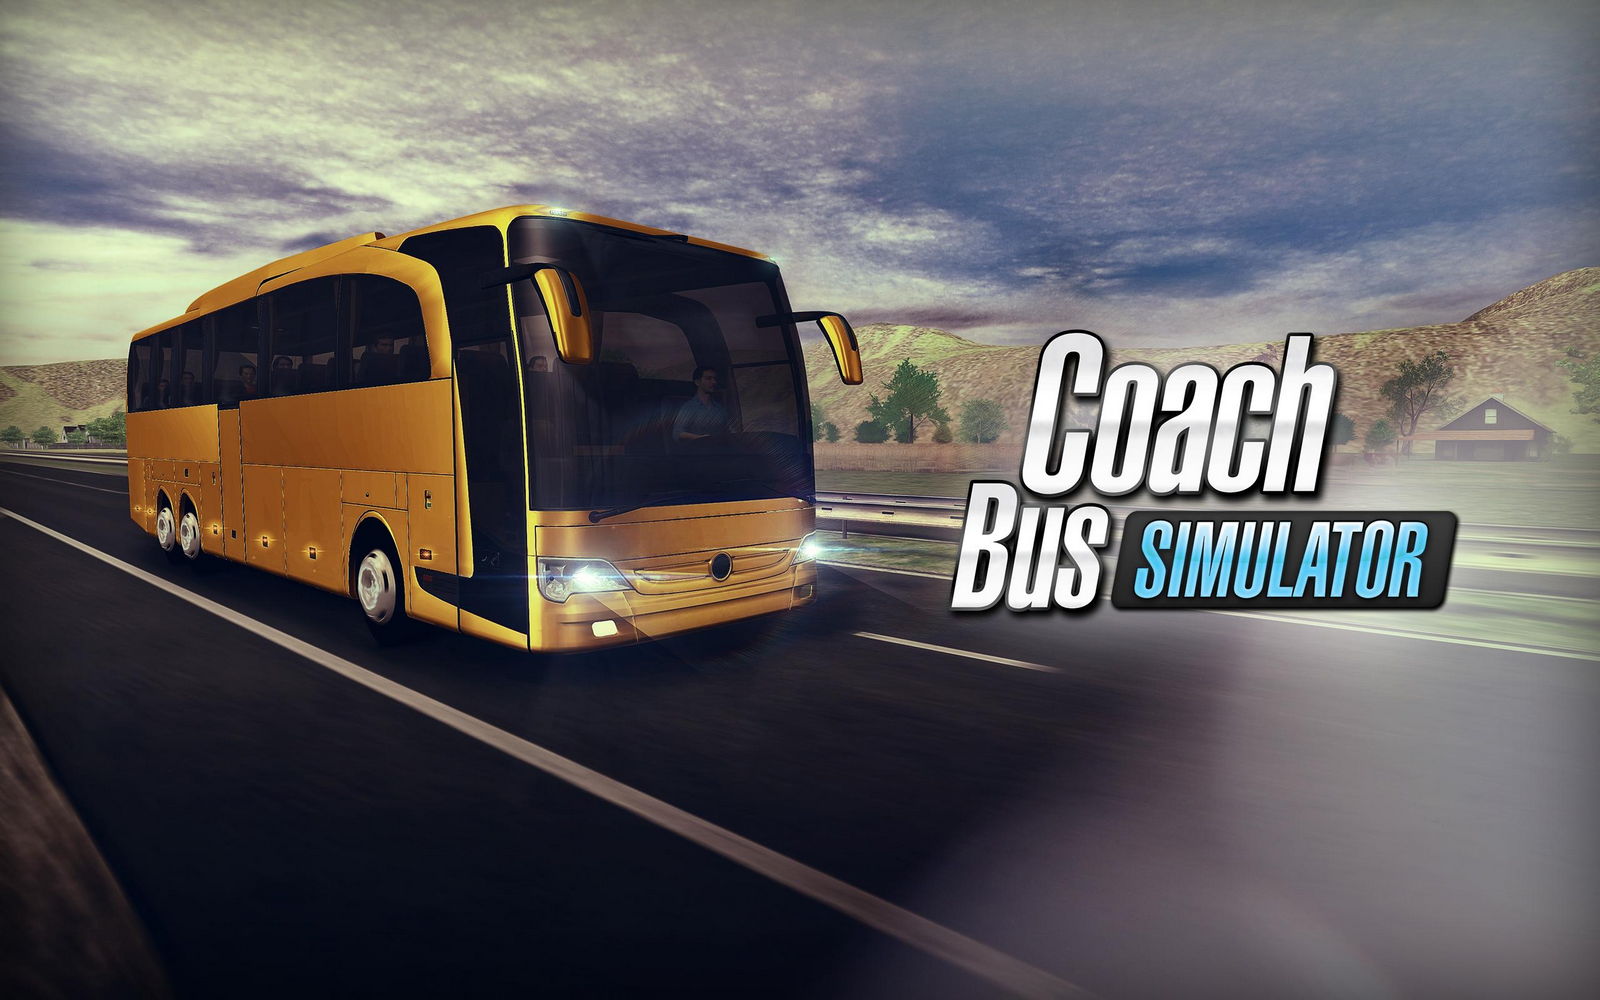 Coach Bus Simulator Android Game APK by